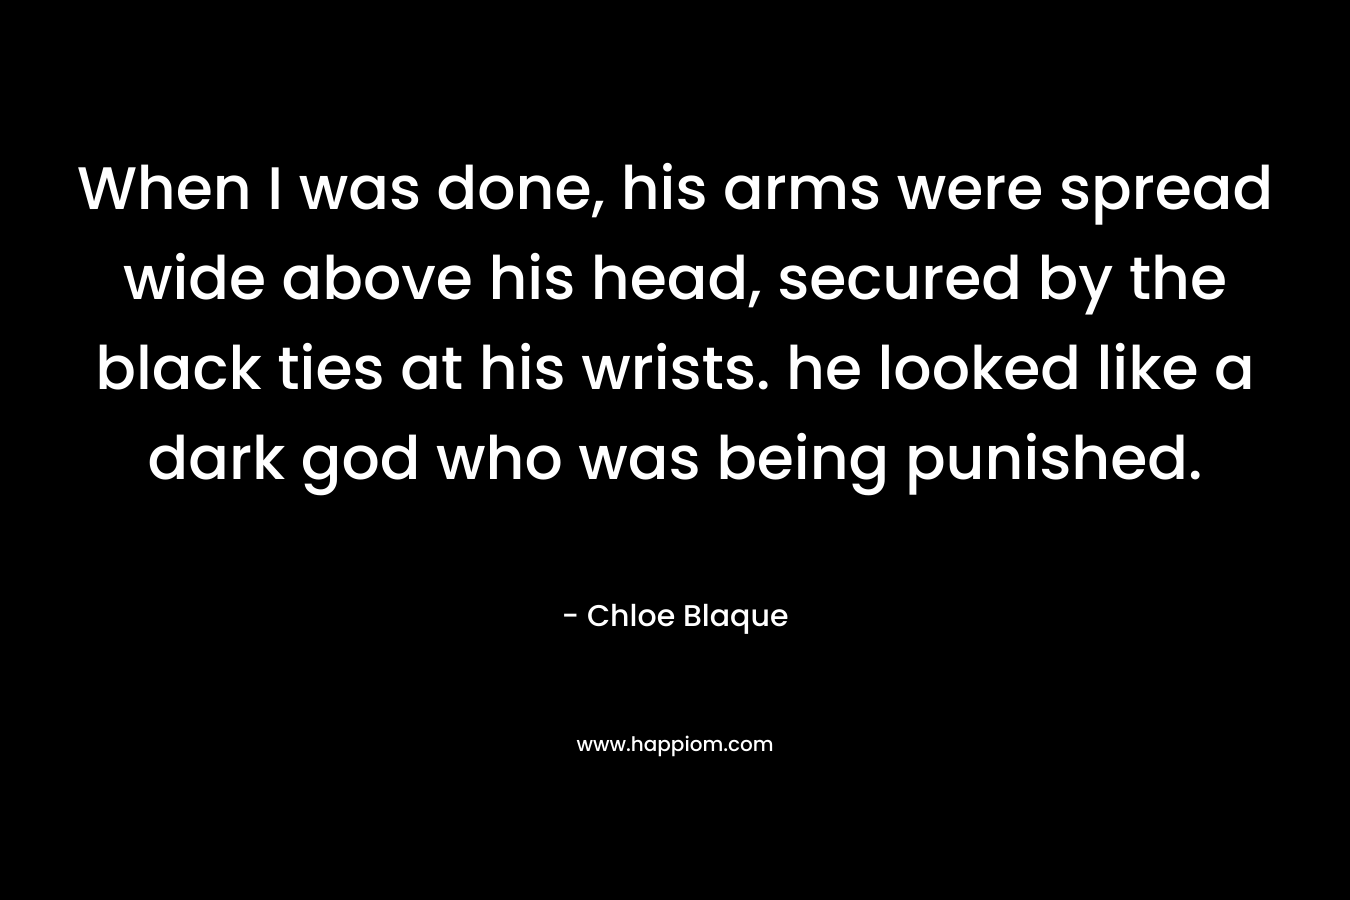 When I was done, his arms were spread wide above his head, secured by the black ties at his wrists. he looked like a dark god who was being punished. – Chloe Blaque